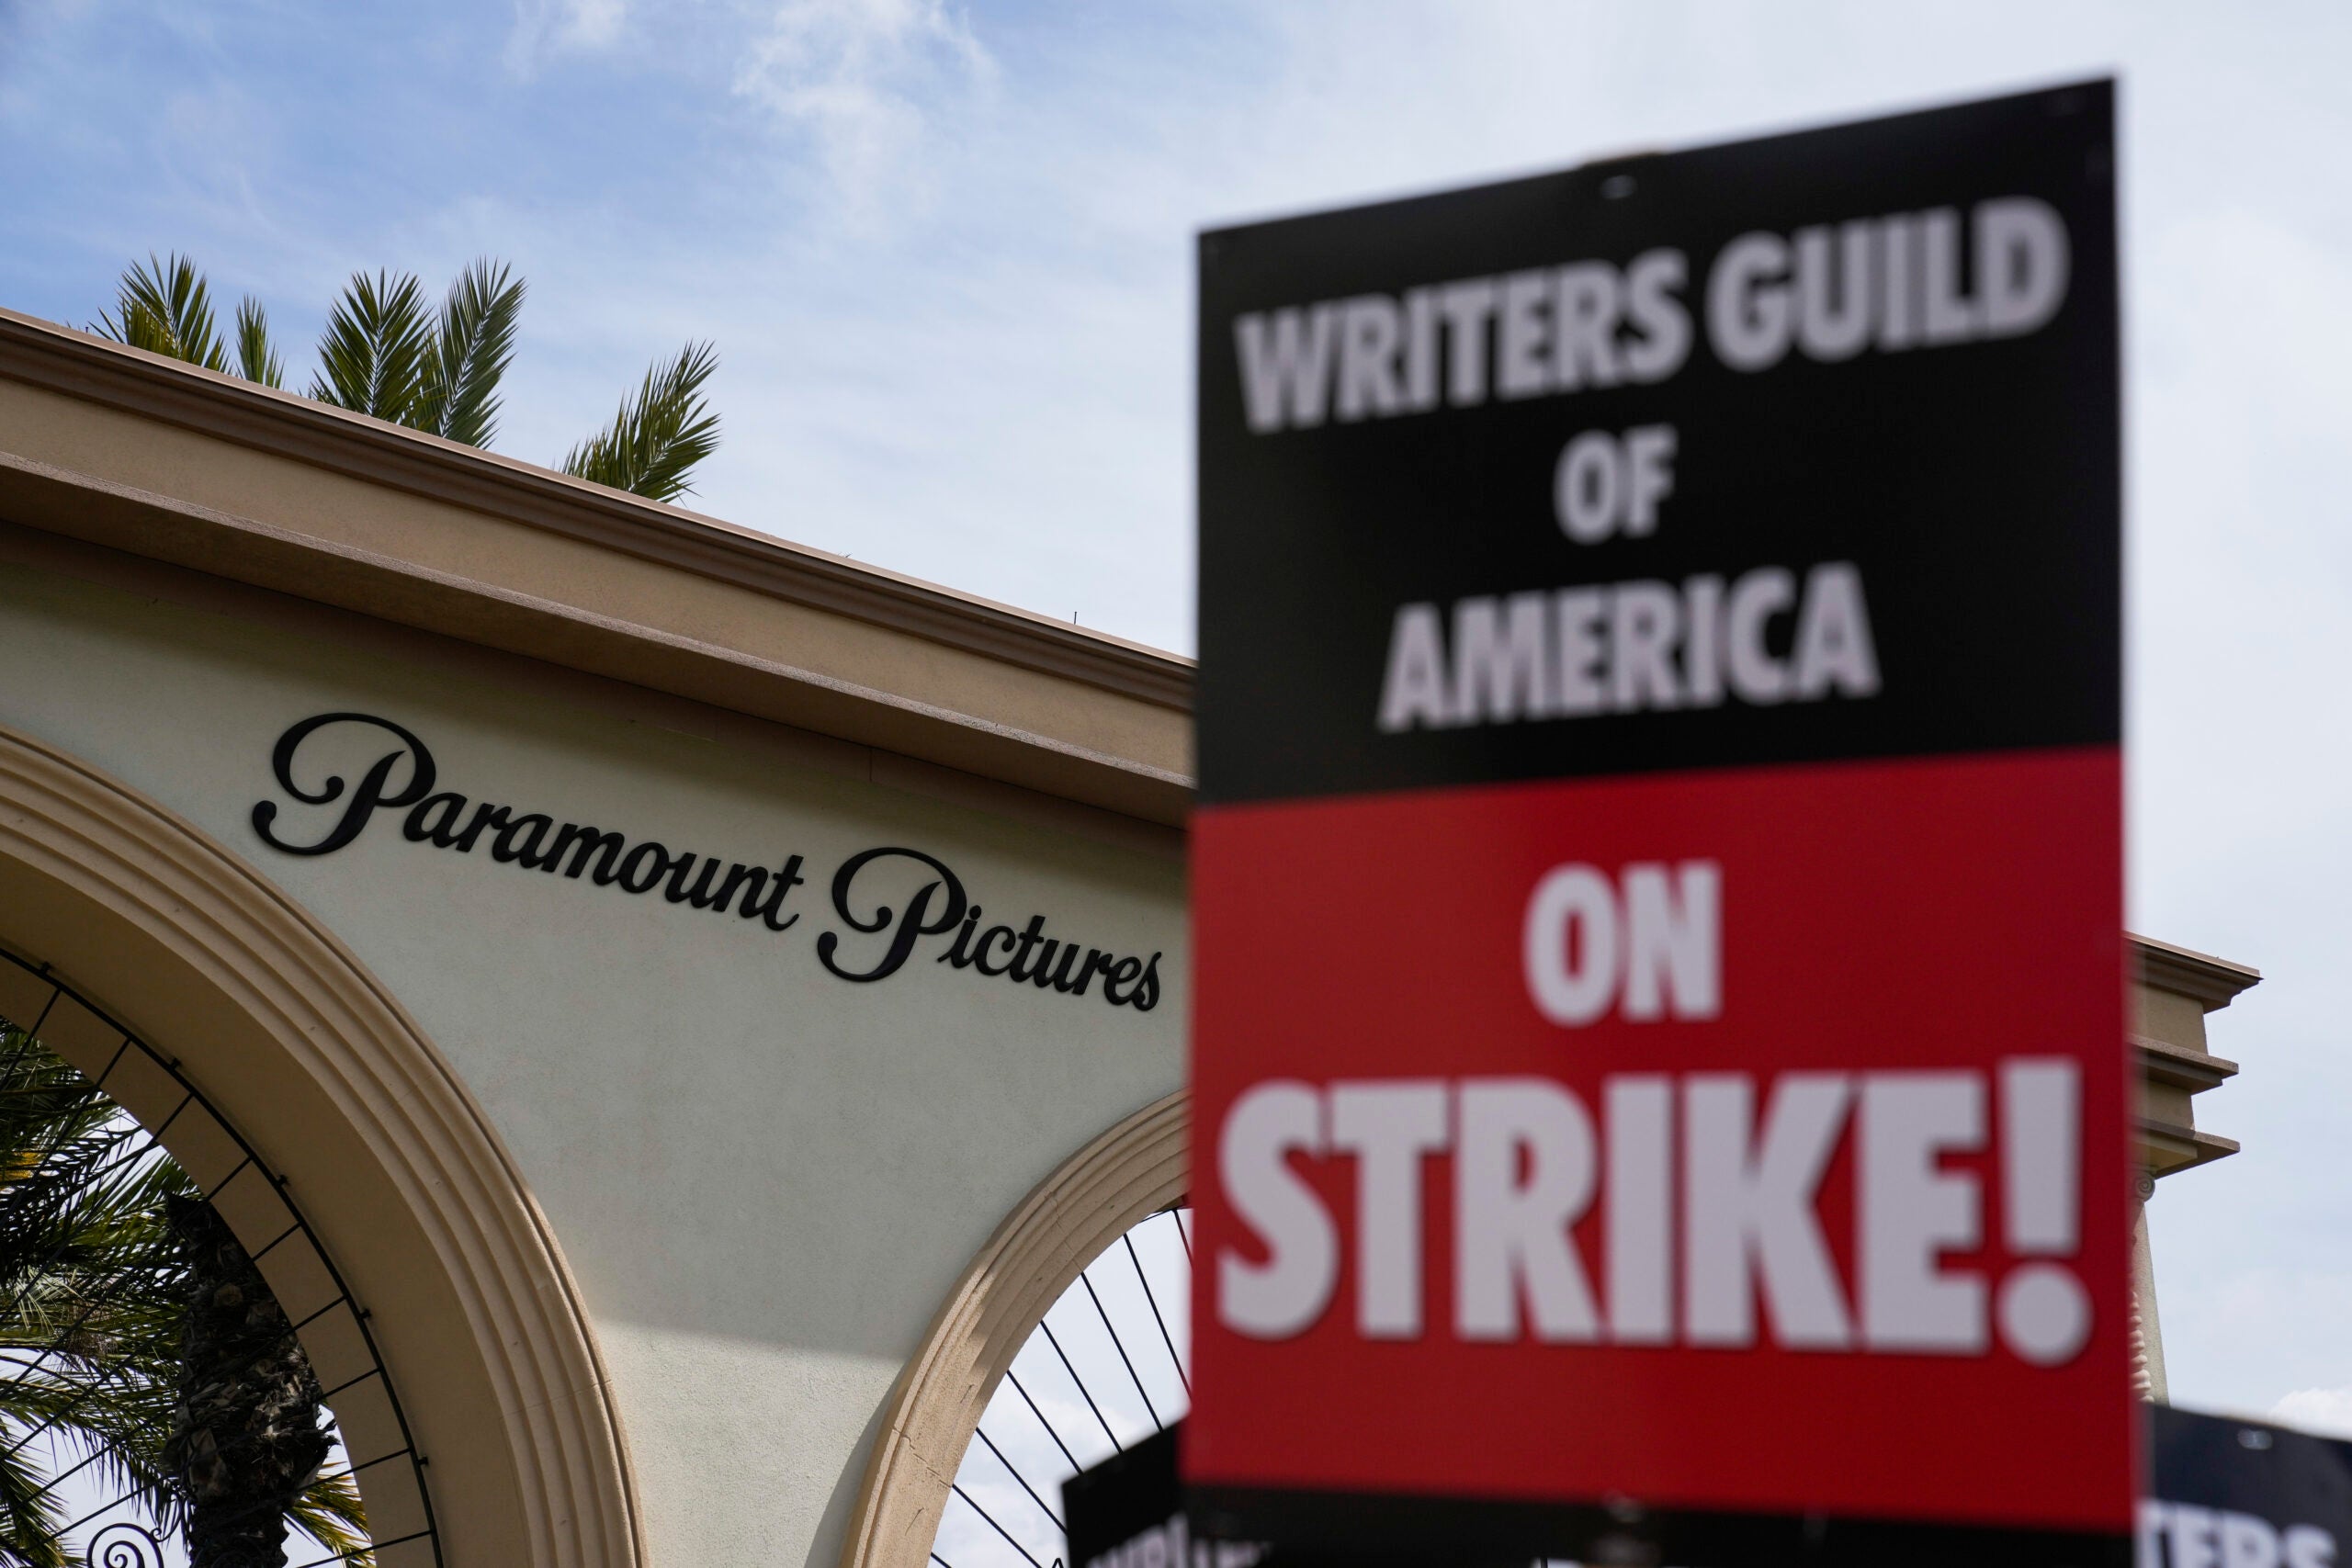 Members of the The Writers Guild of America picket outside Paramount Pictures in Los Angeles.